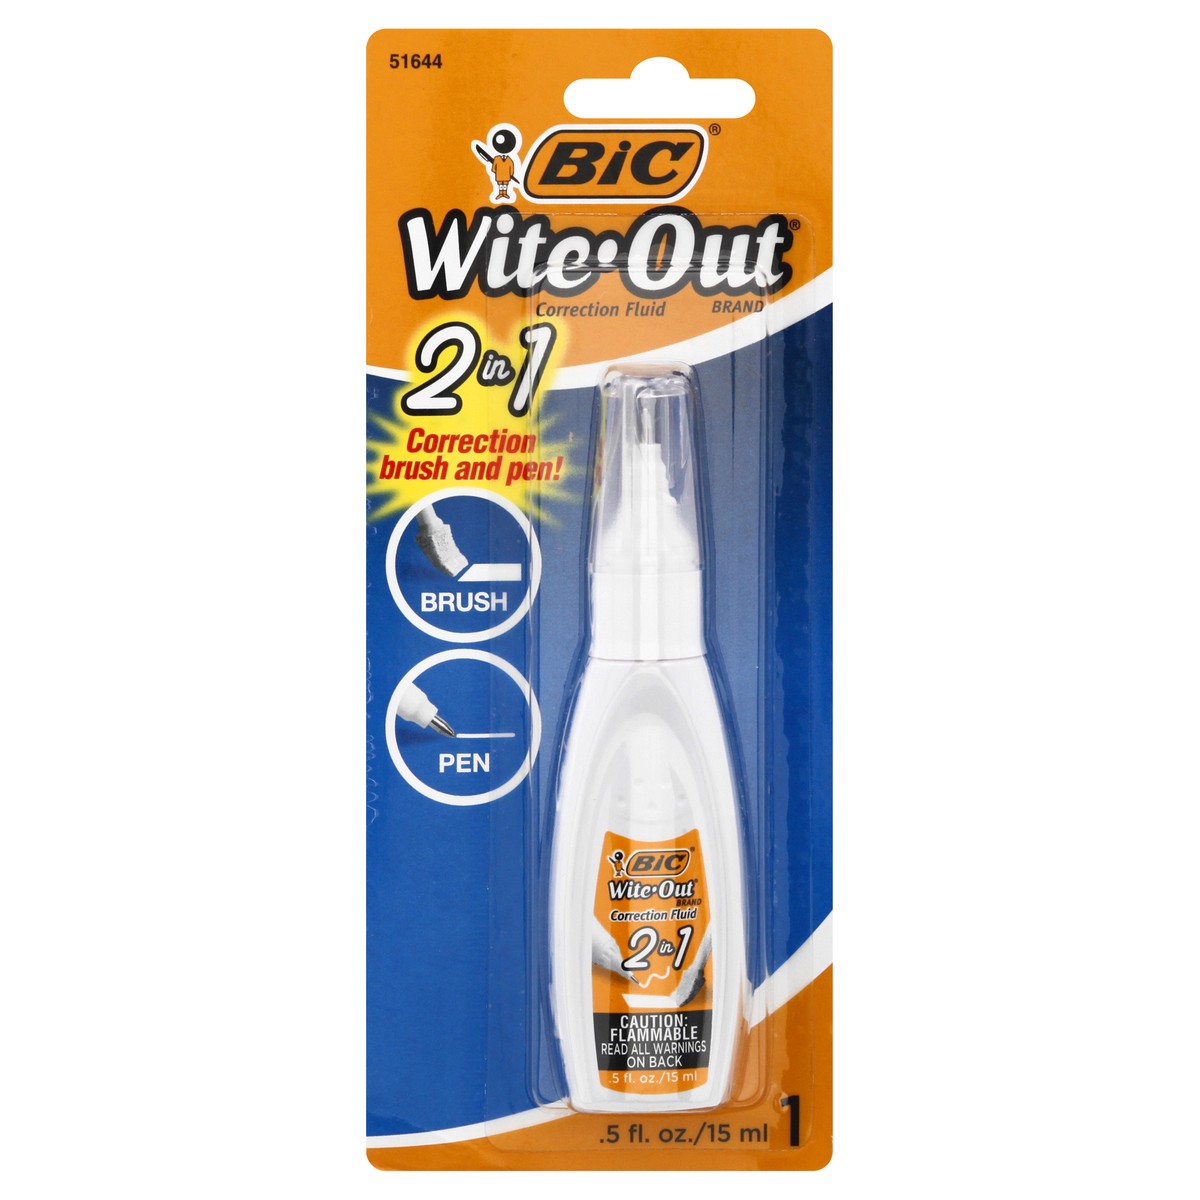 slide 1 of 9, BIC Wite-Out 2-in-1 Correction Fluid, 1 ct